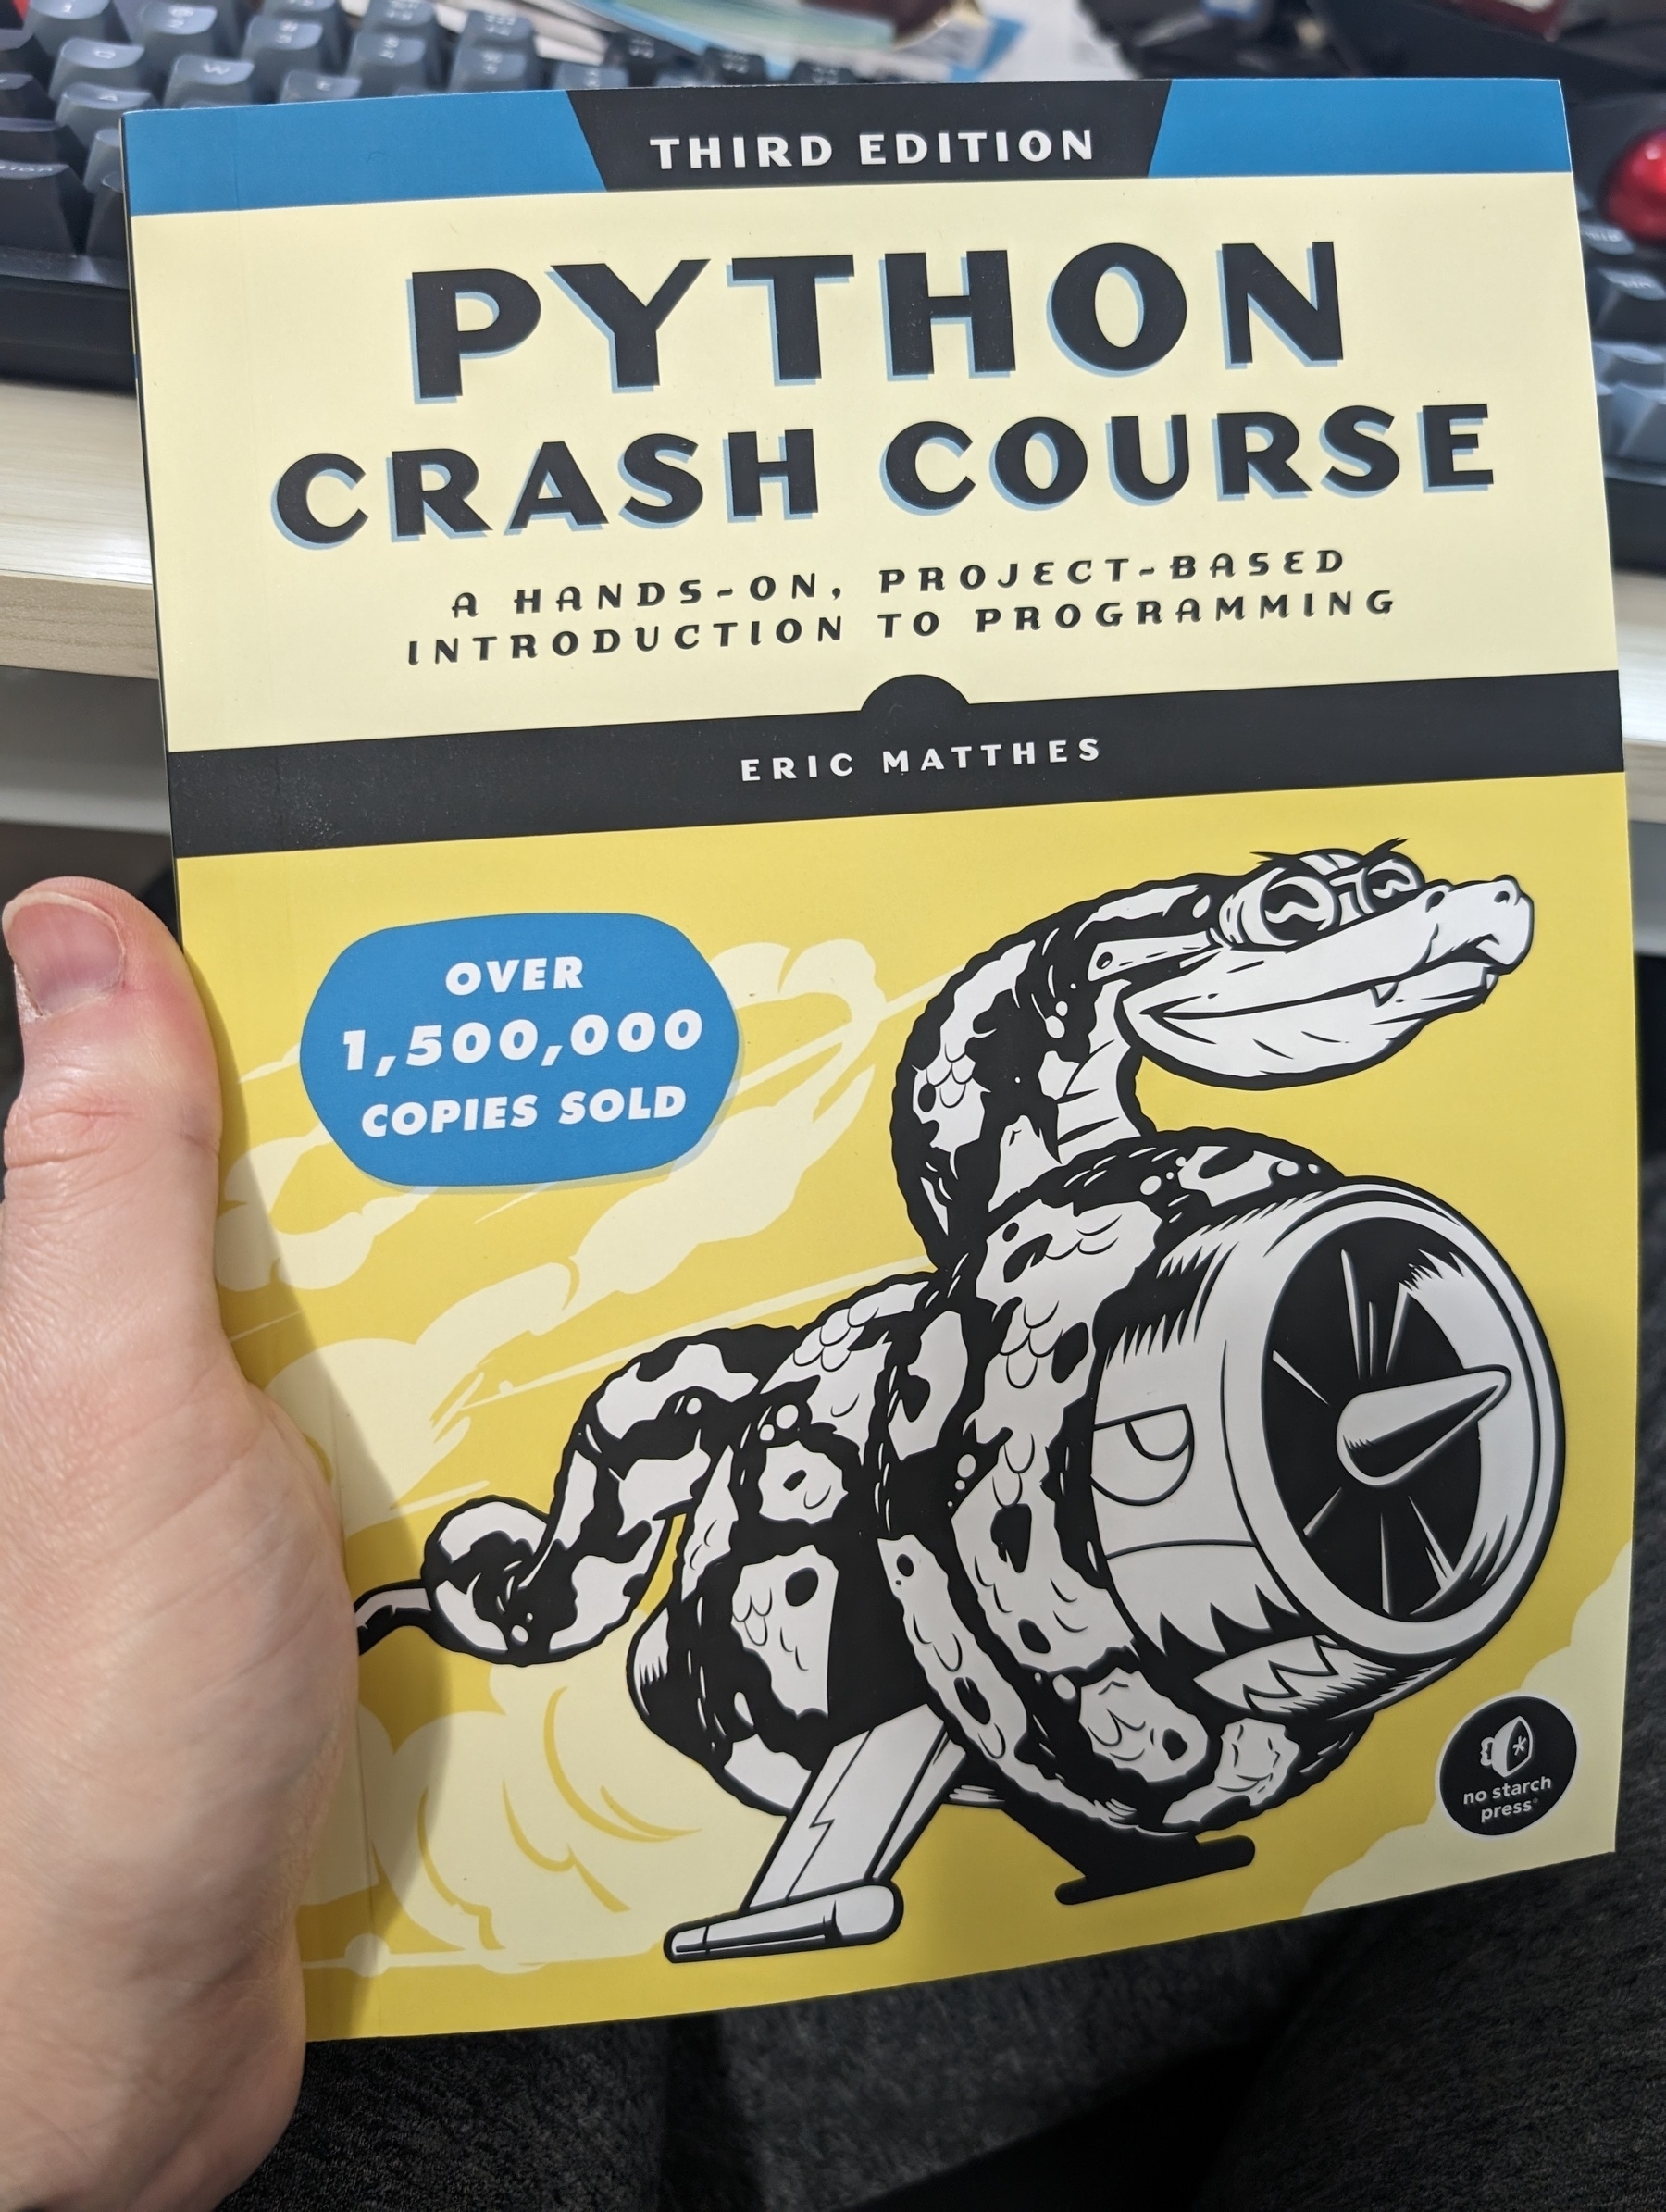 Photo of the book "Python Crash Course: A hands on, projects based introduction to programming", third edition, by Eric Matthews.